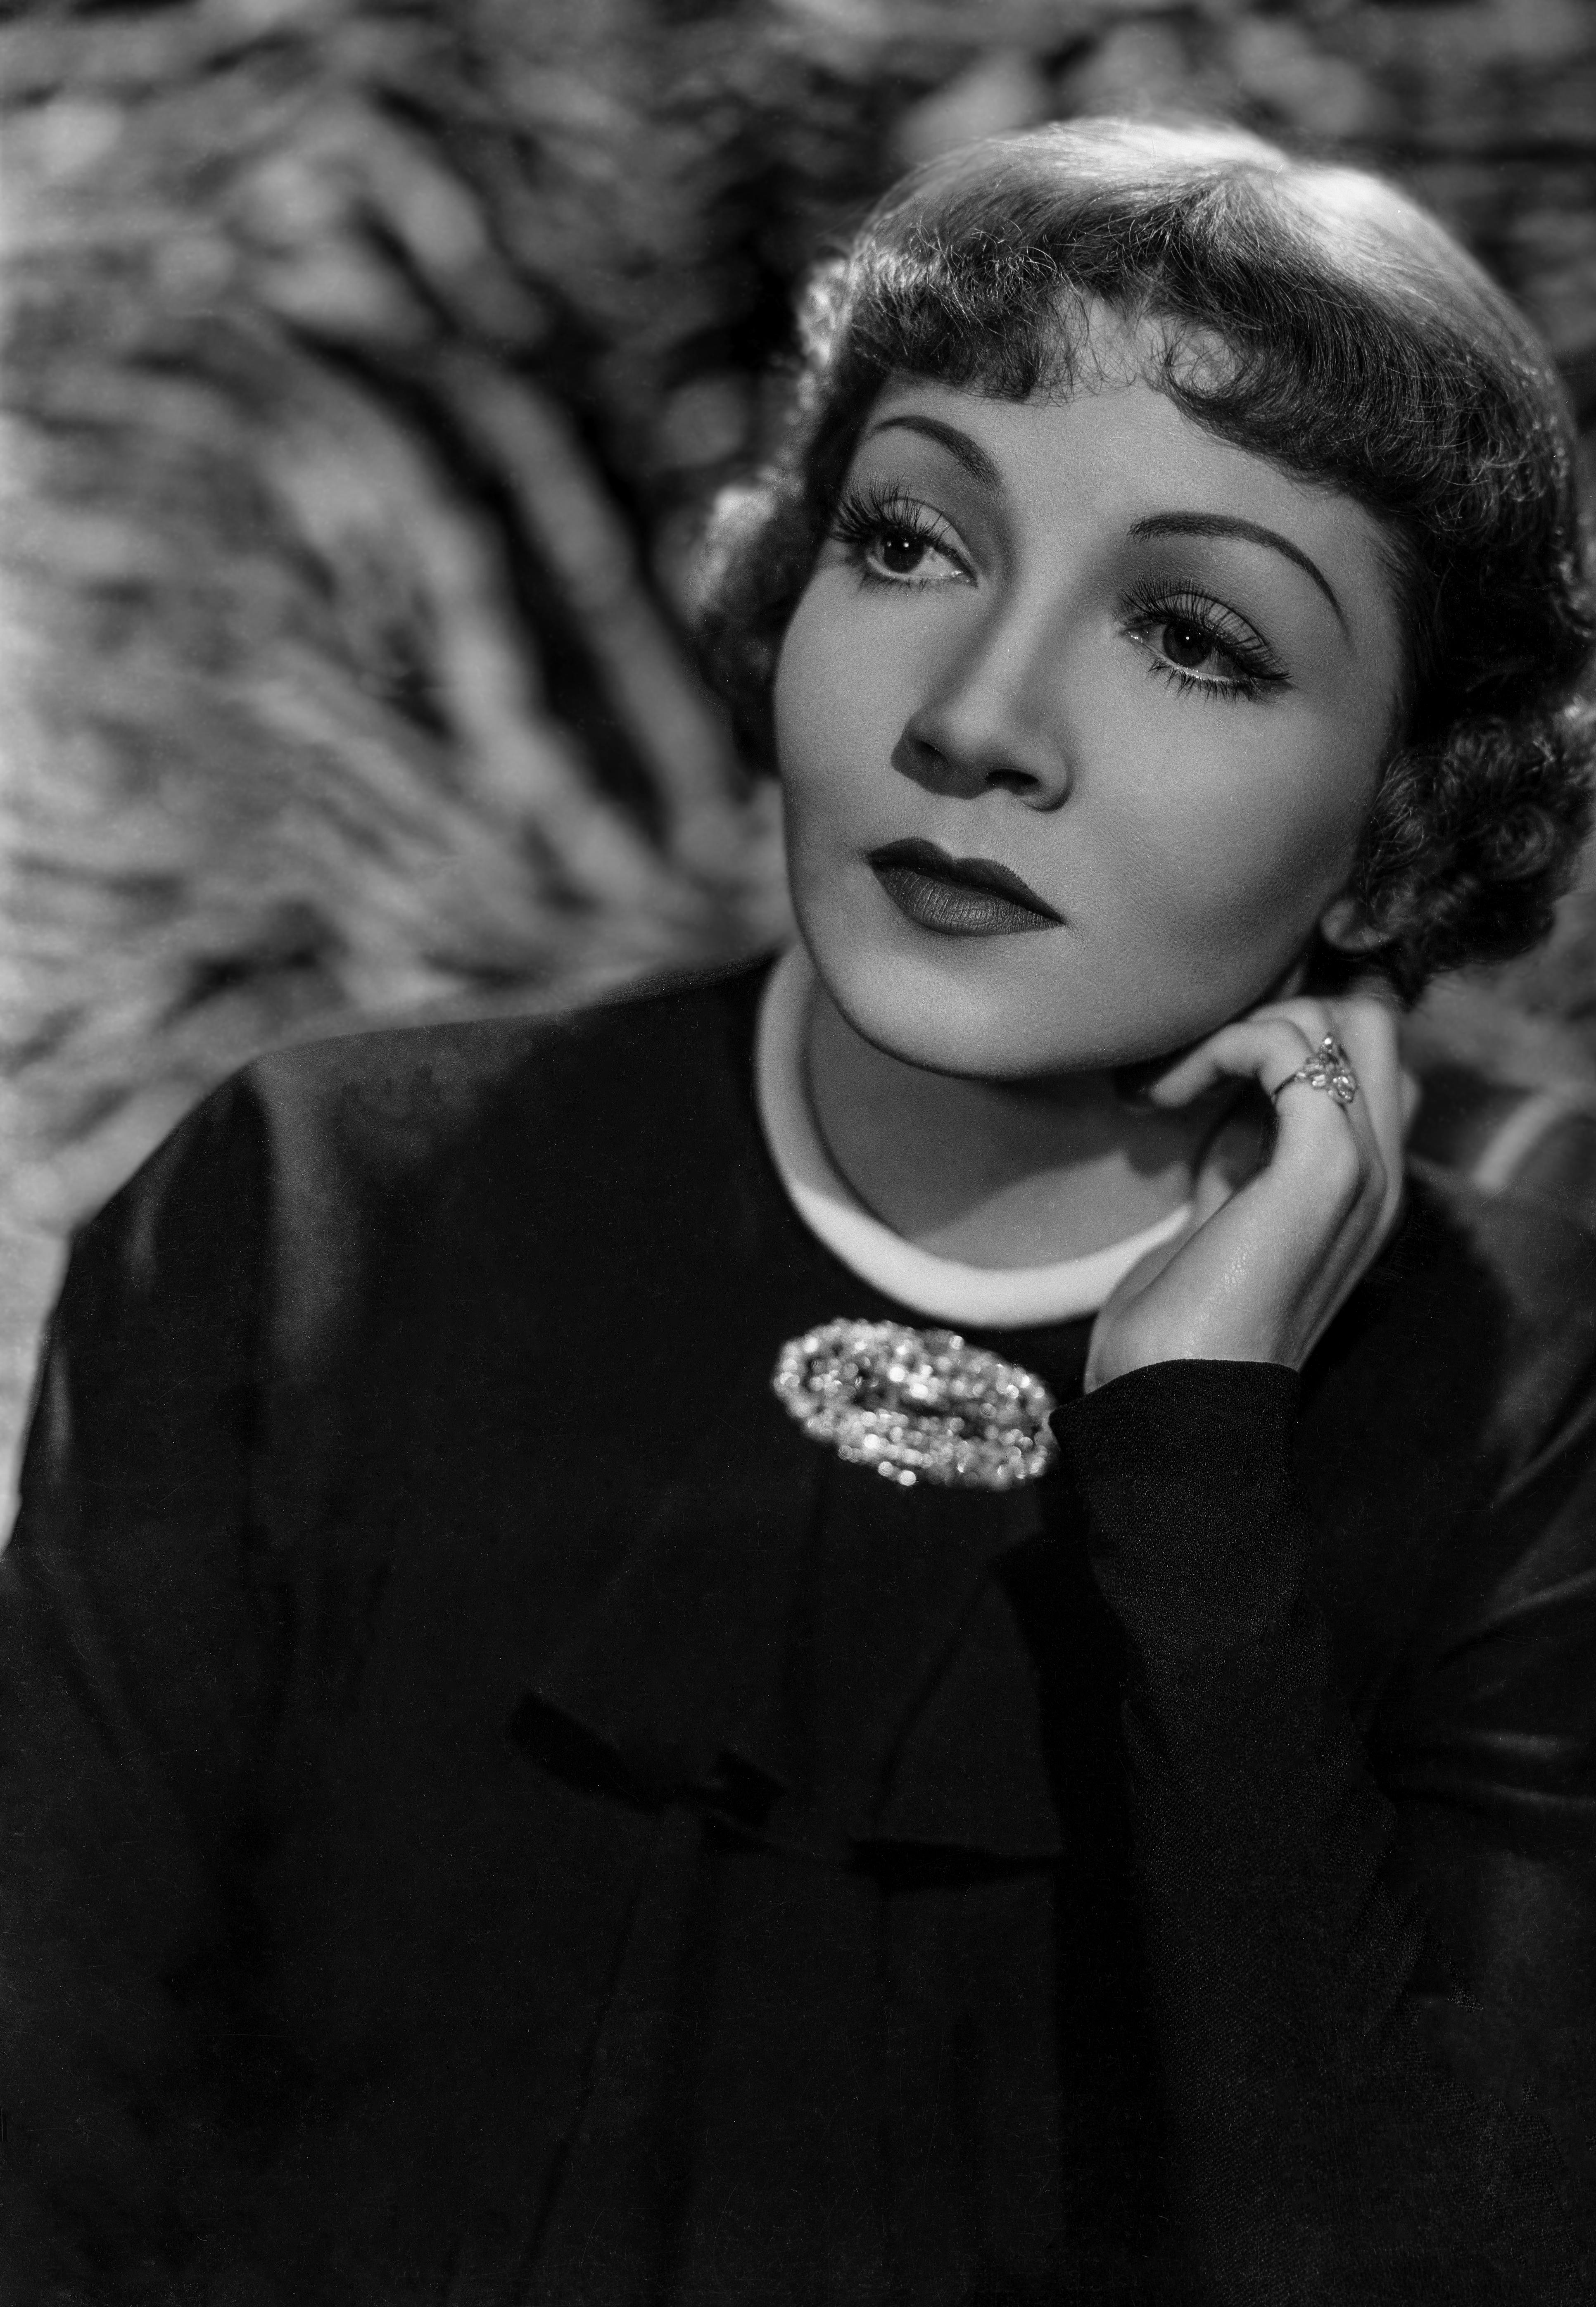 Stephen Walling Black and White Photograph – Claudette Colbert Deep in Thought Movie Star News Fine Art Print